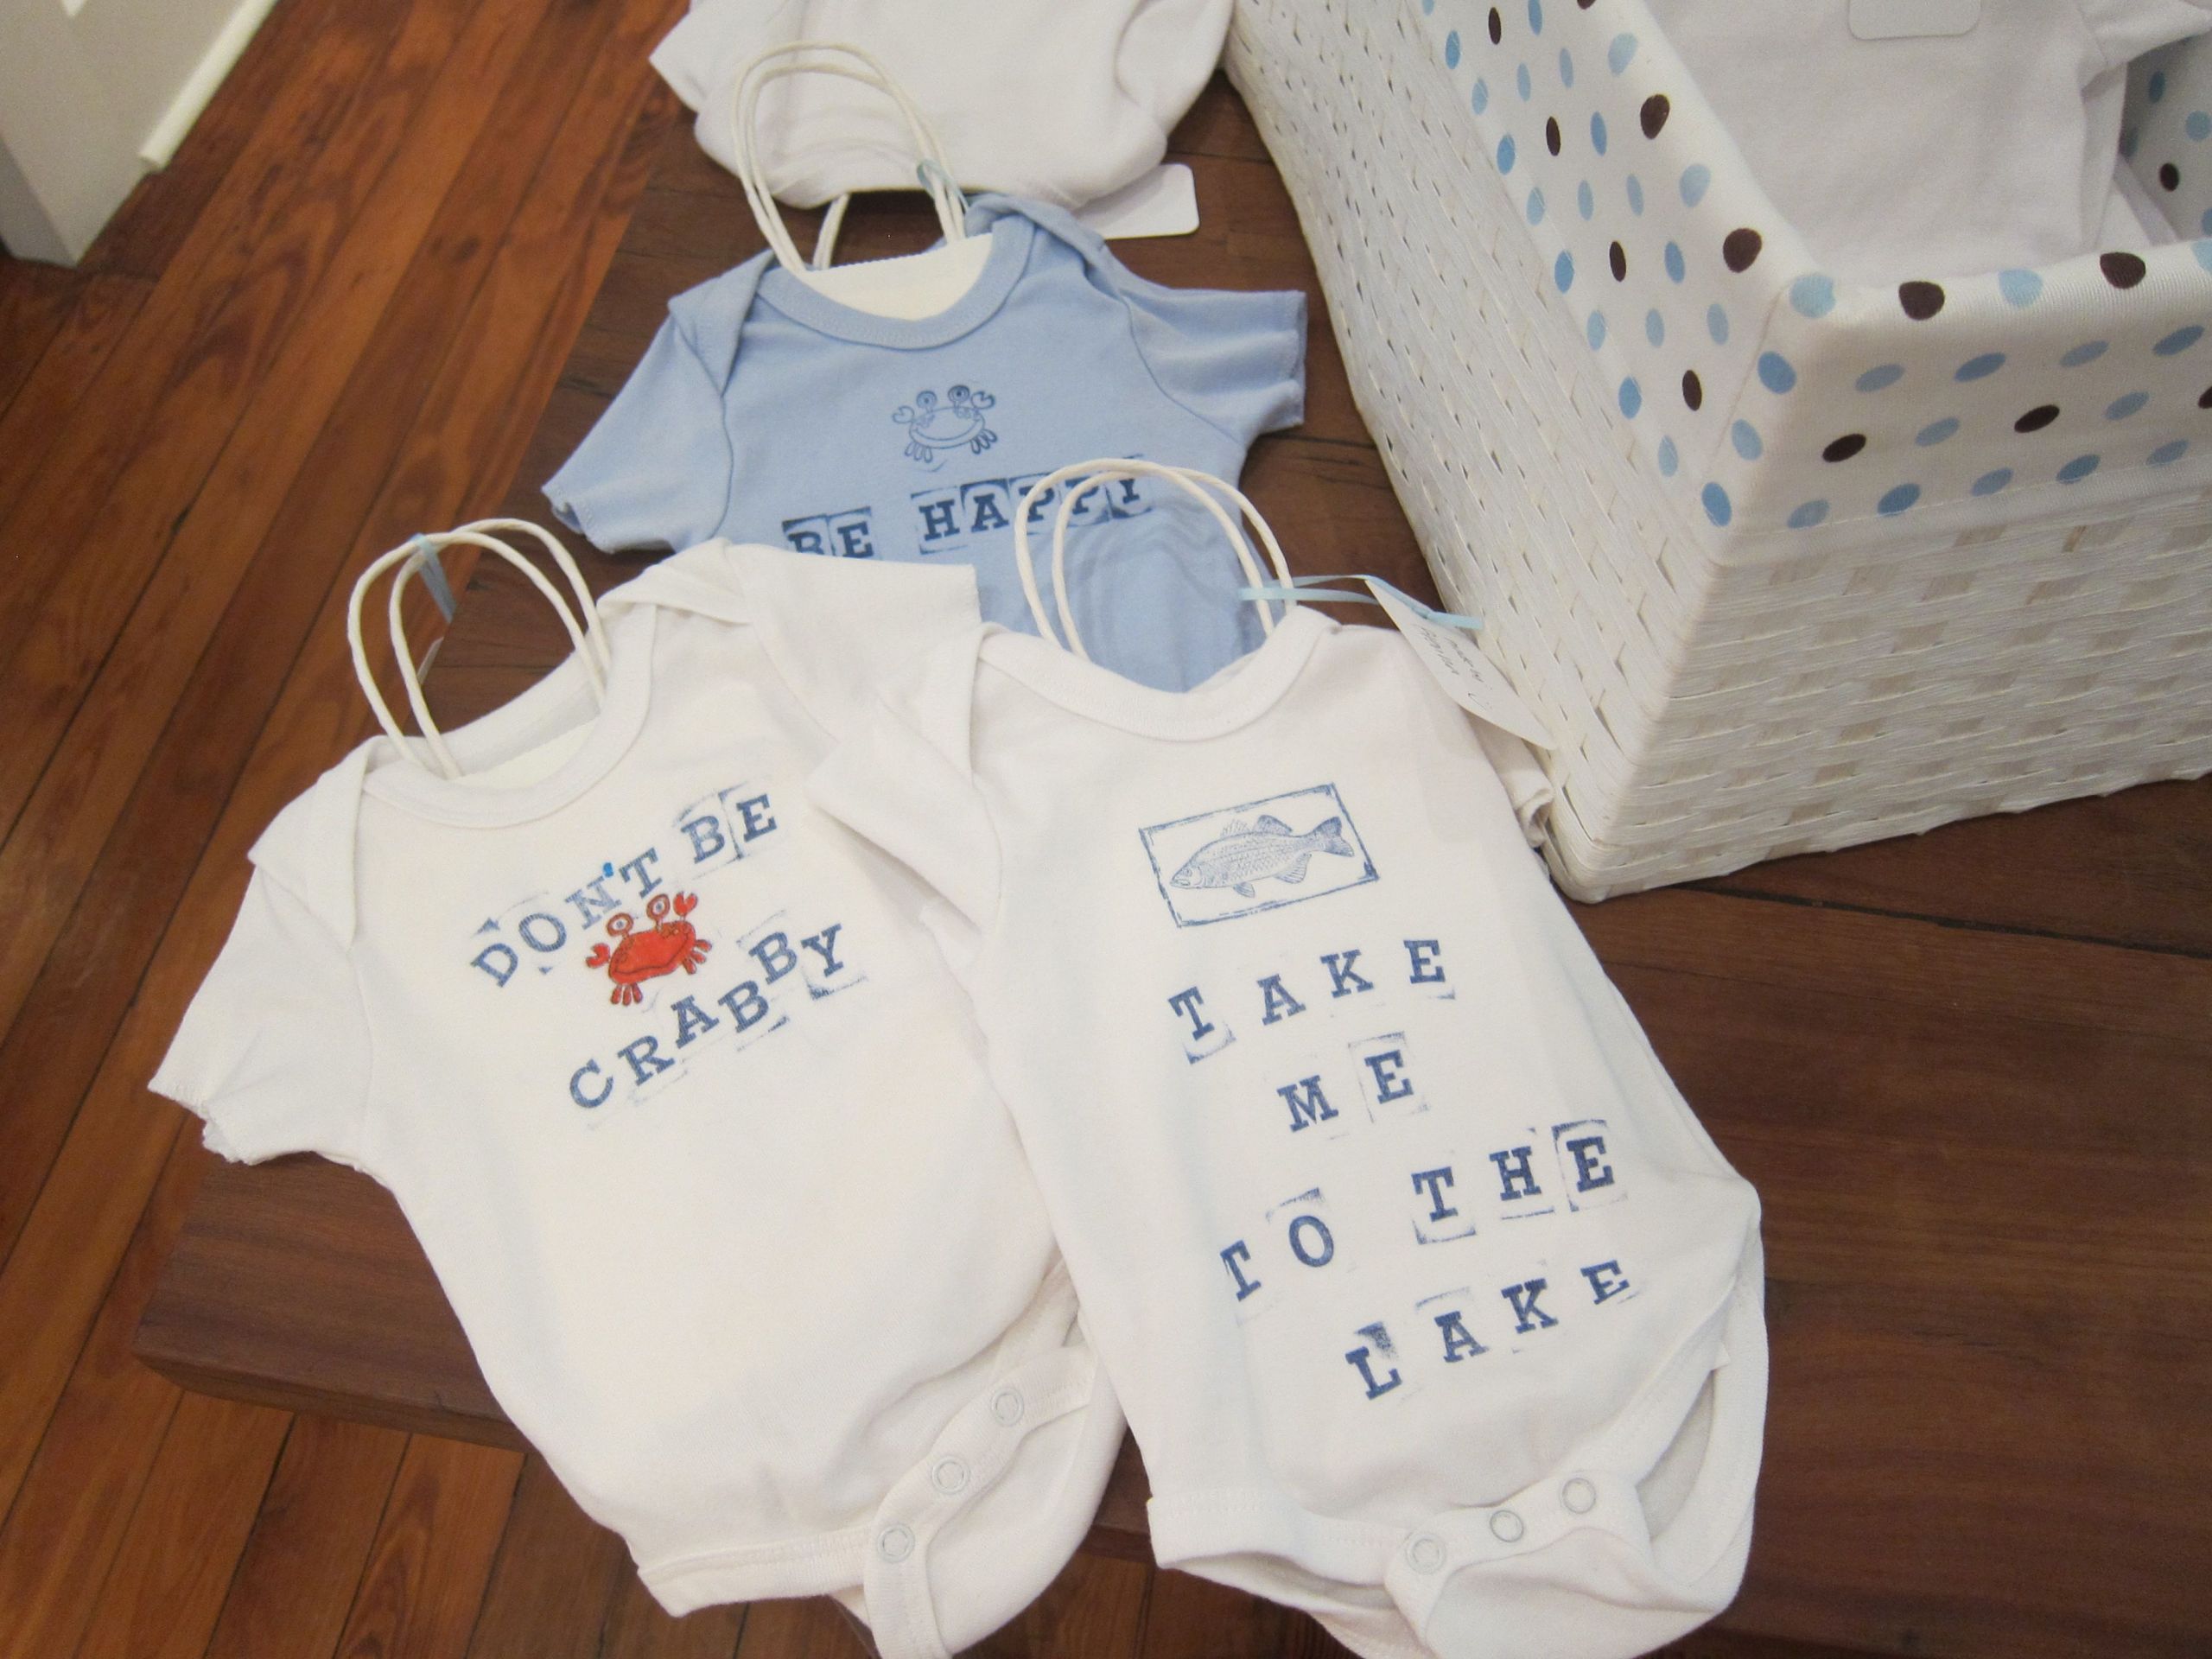 Baby Shower Onesie Decorating Ideas
 Supplies needed for a onesie decorating station pre